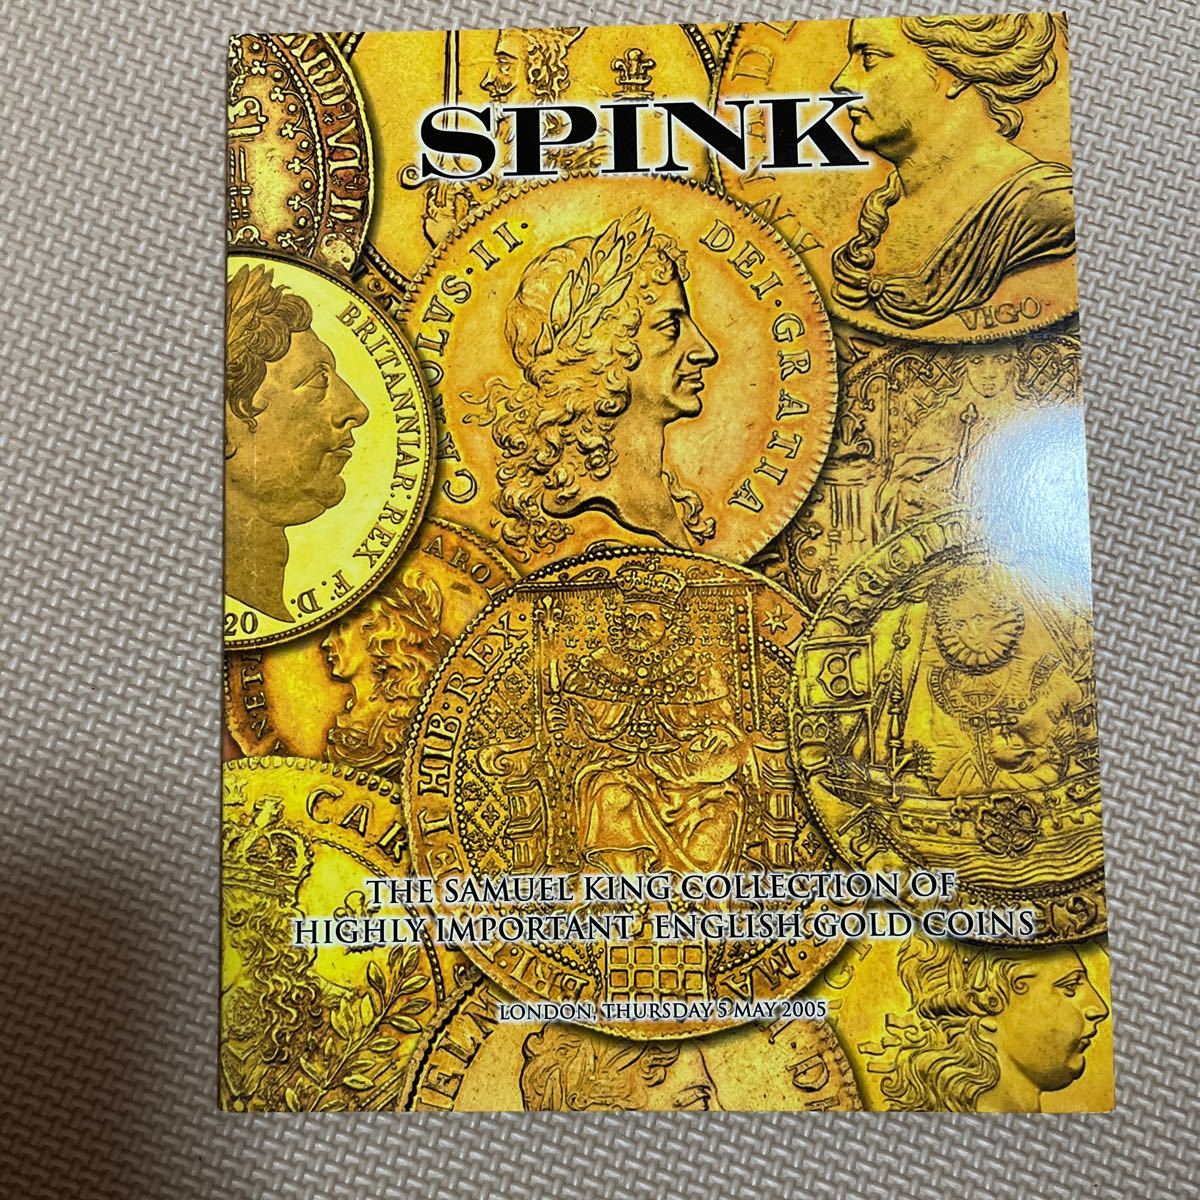 SPINK THE SAMUEL KING COLLECTION OF HIGHLY IMPORTANT ENGLISH GOLD COINS 2005 カタログ コイン メダル 硬貨 金貨 コレクションの画像1